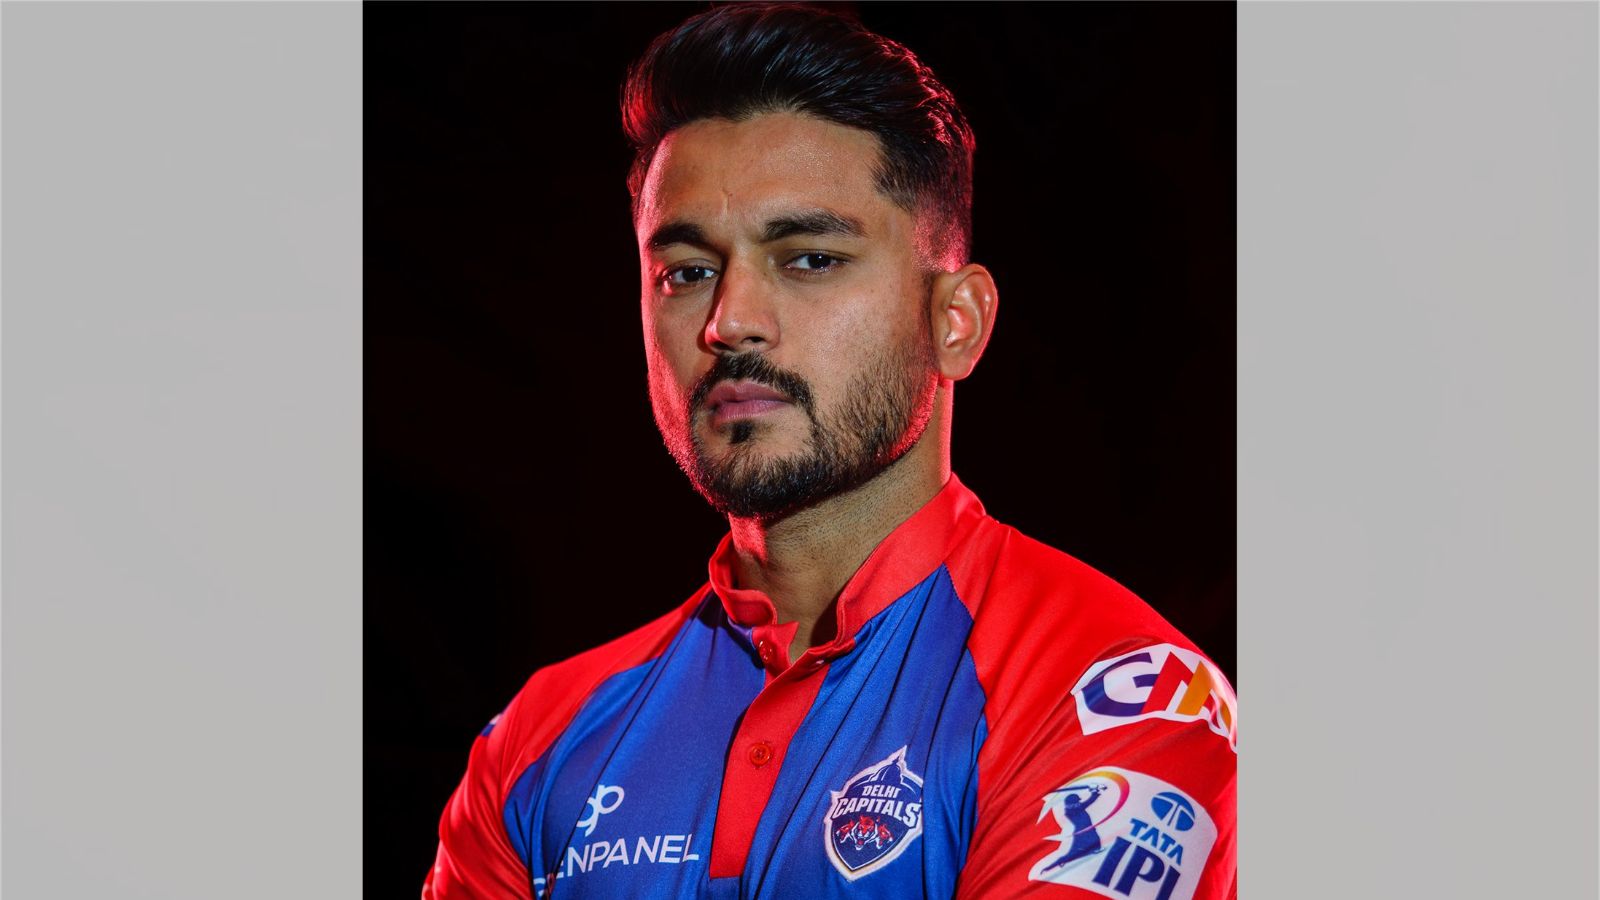 IPL 2021: Aakash Chopra Feels Manish Pandey Absolutely Failed To Accelerate  And Make Other Batsmen's Task Easier Against RCB